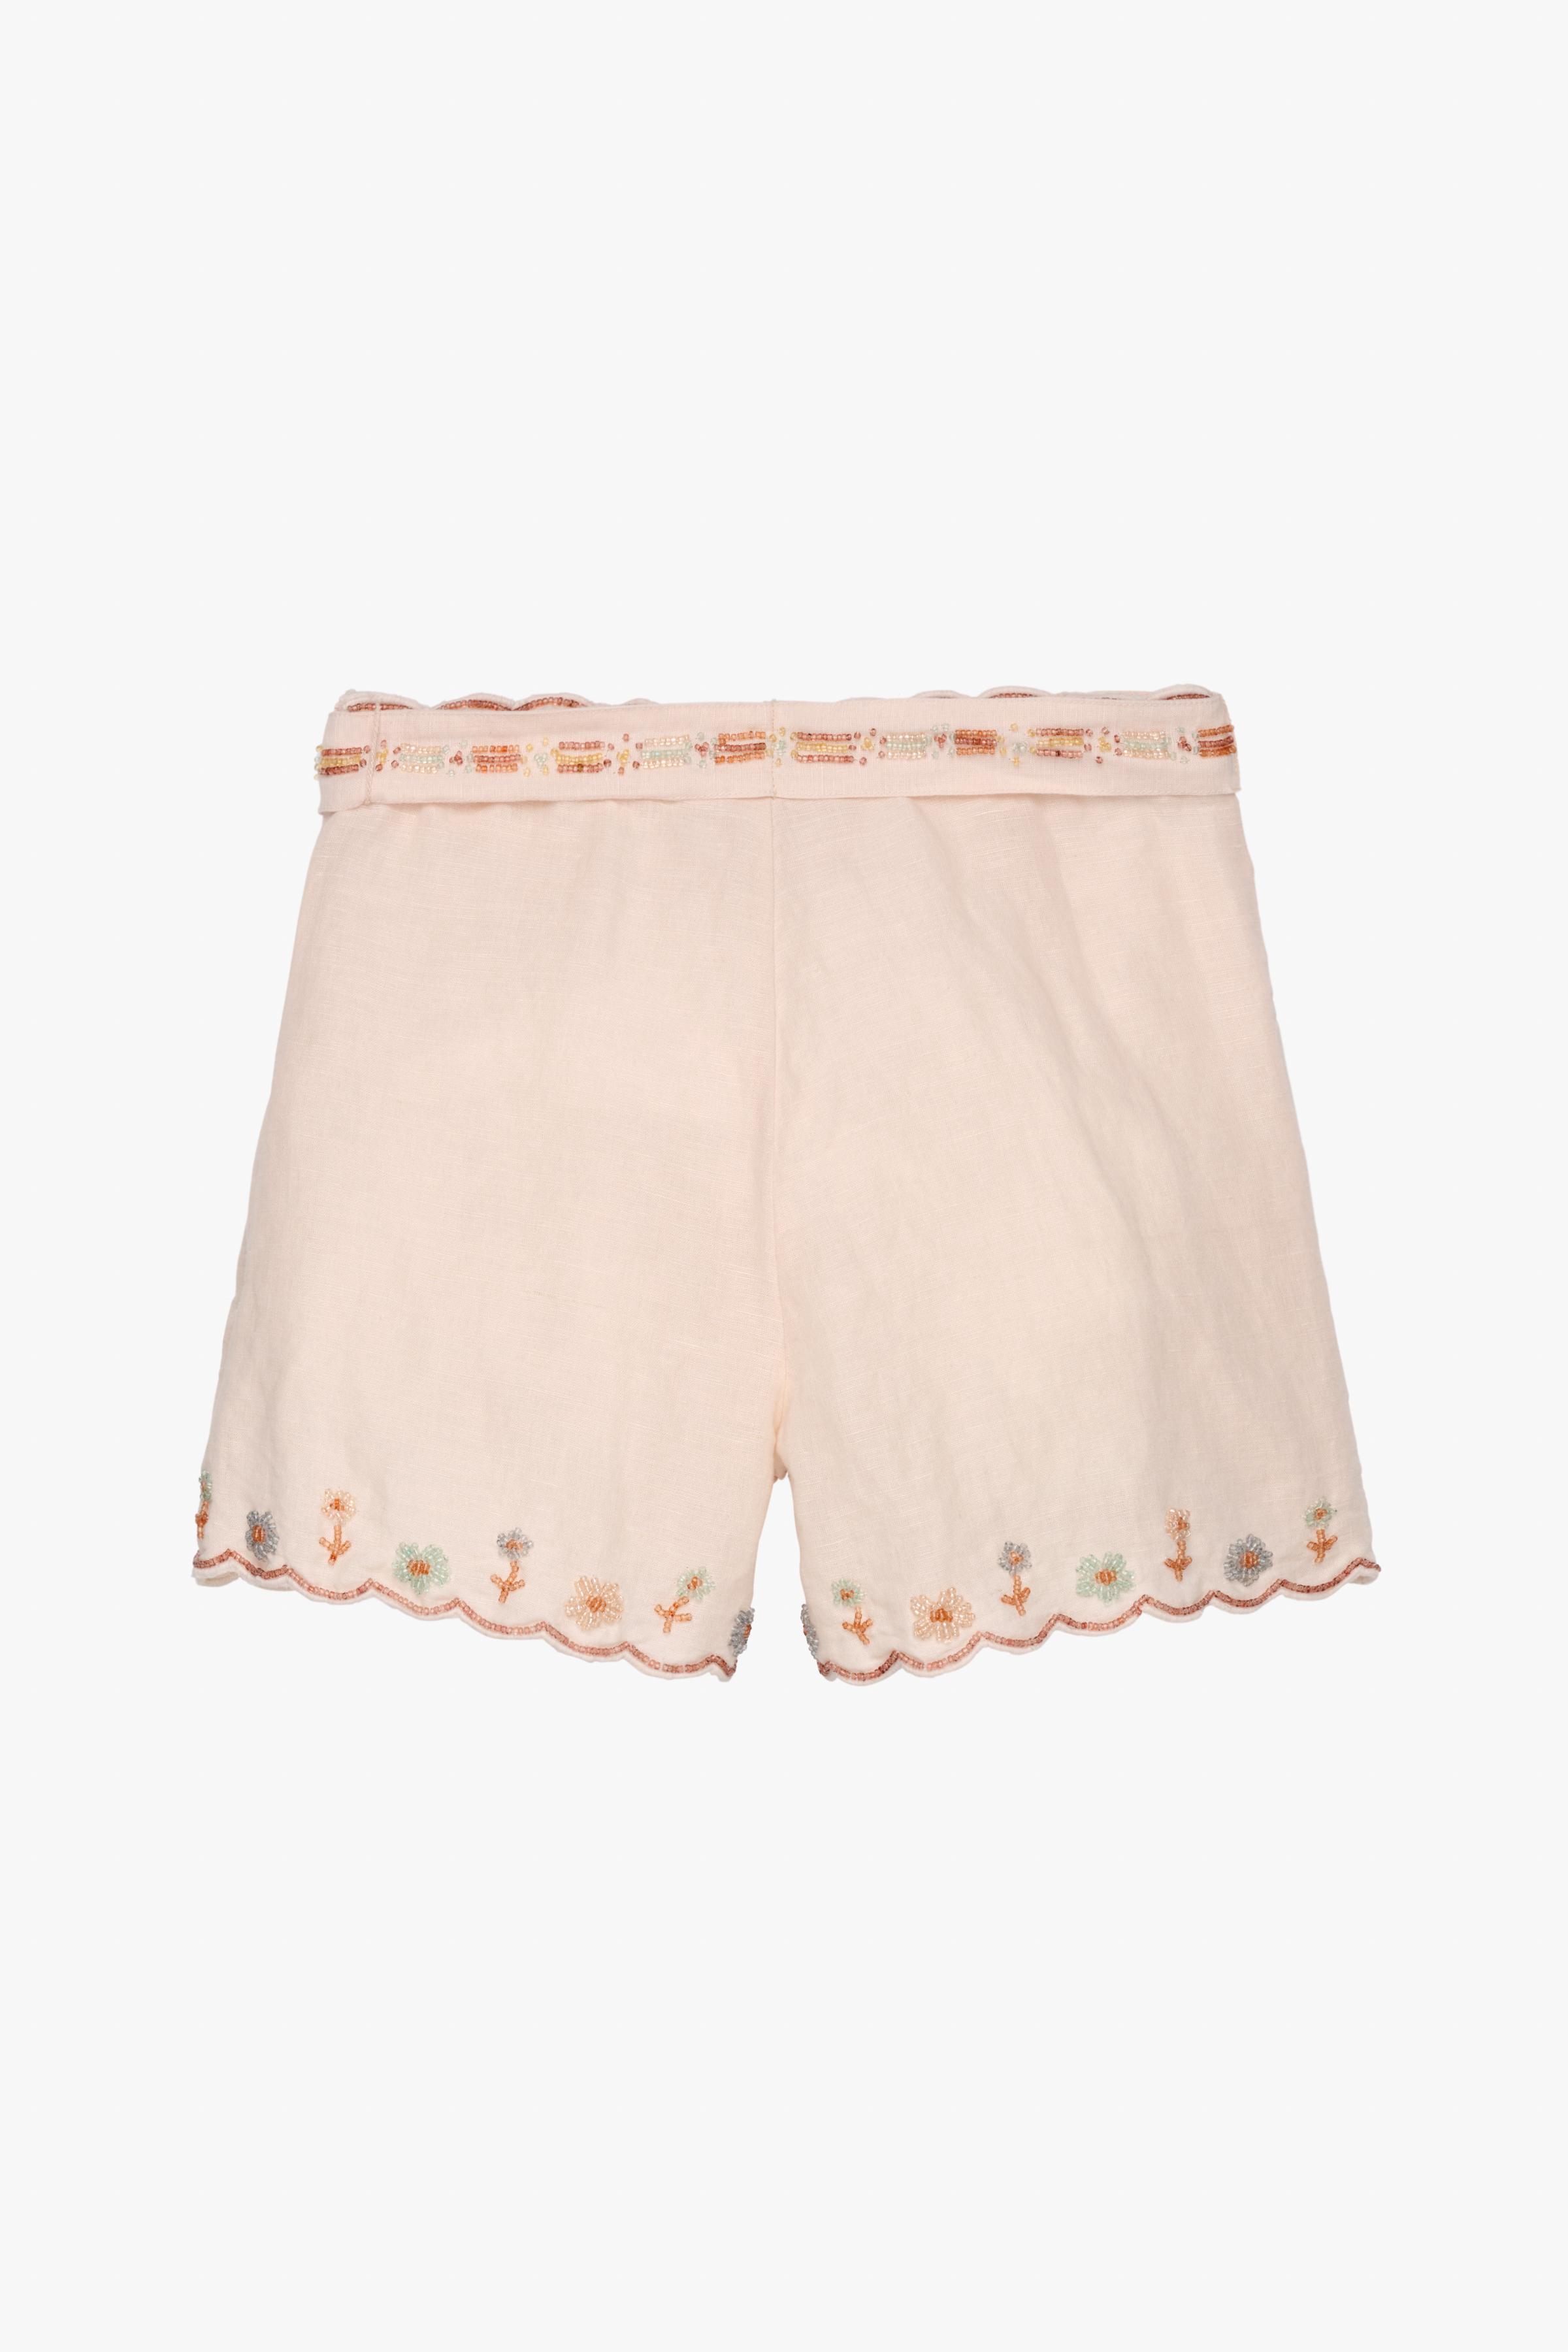 BEADED SHORTS LIMITED EDITION - Pale pink